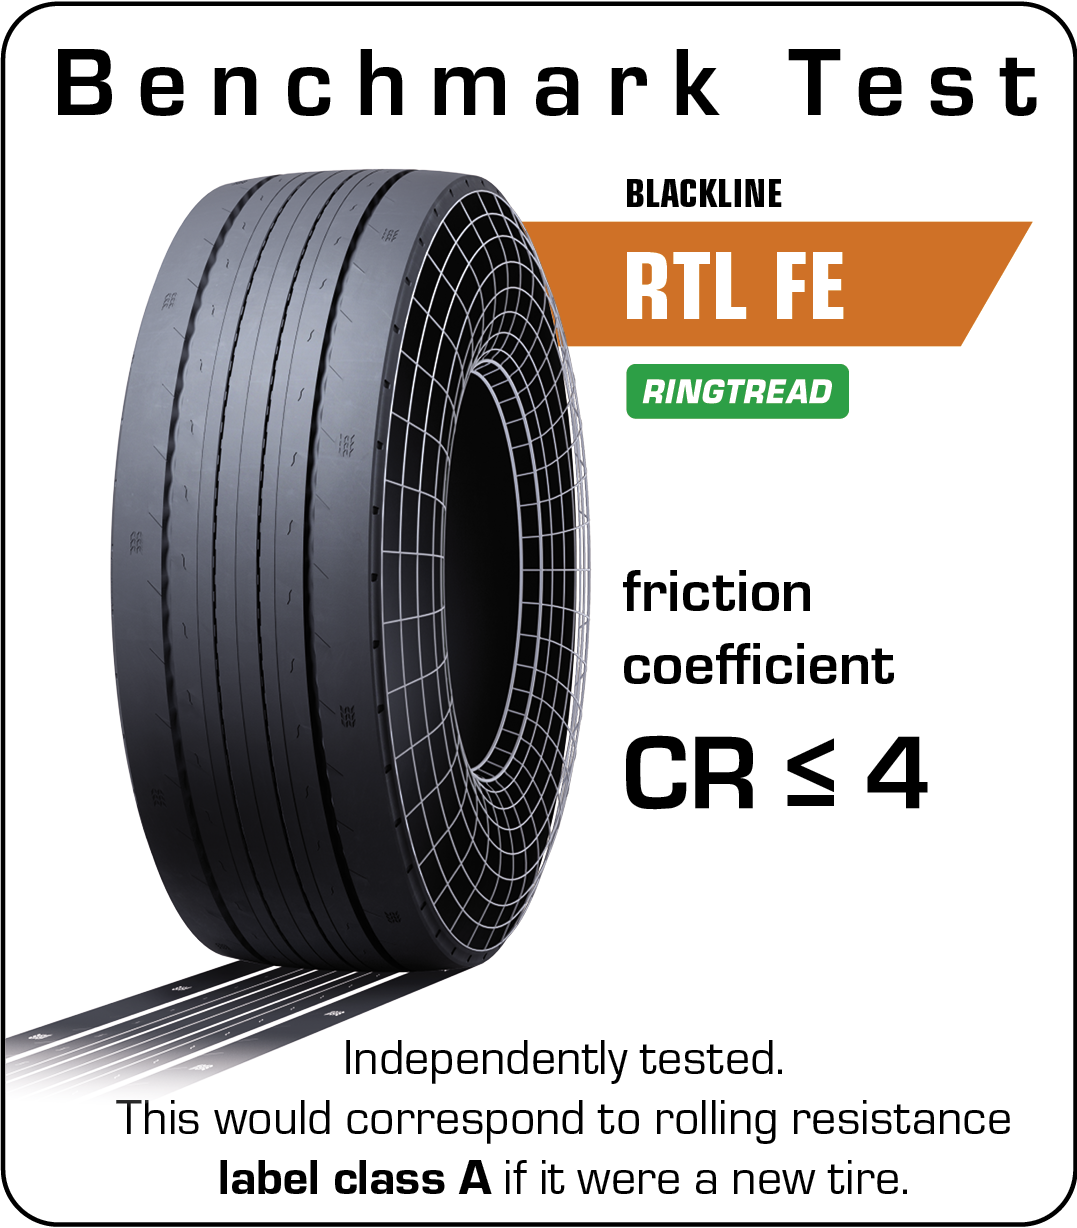 Marangoni: Our retread would have had the same rolling resistance as a new tyre